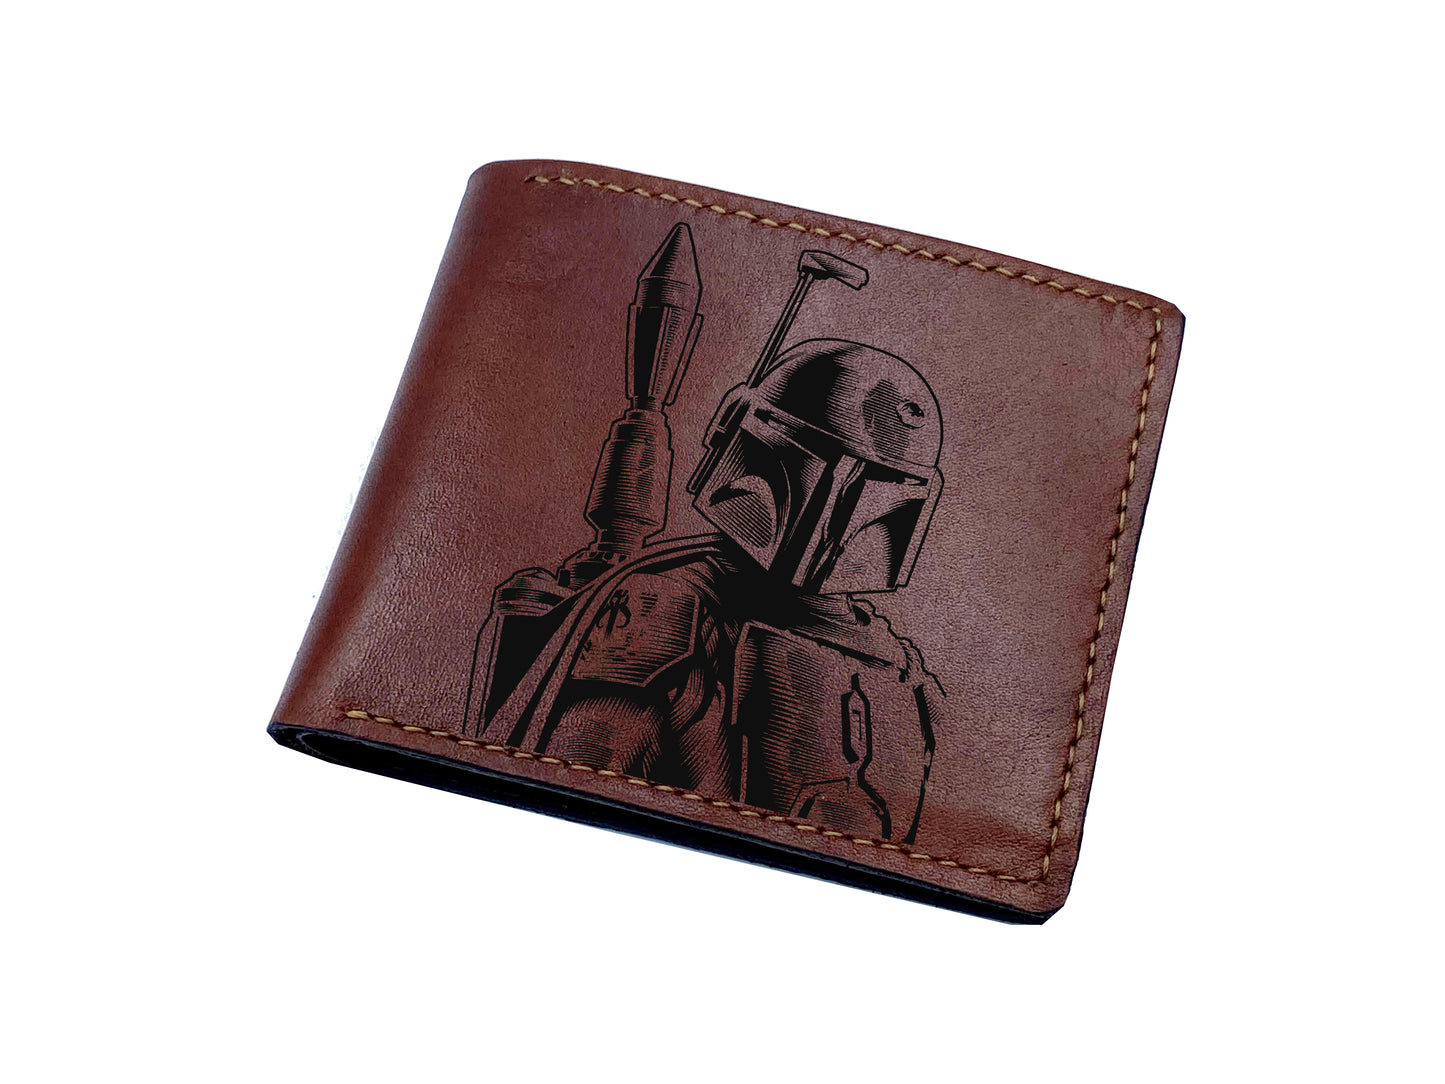 Starwars characters leather art wallet, modern art drawing wallet, cool leather gift for him, christmas gift ideas for brother